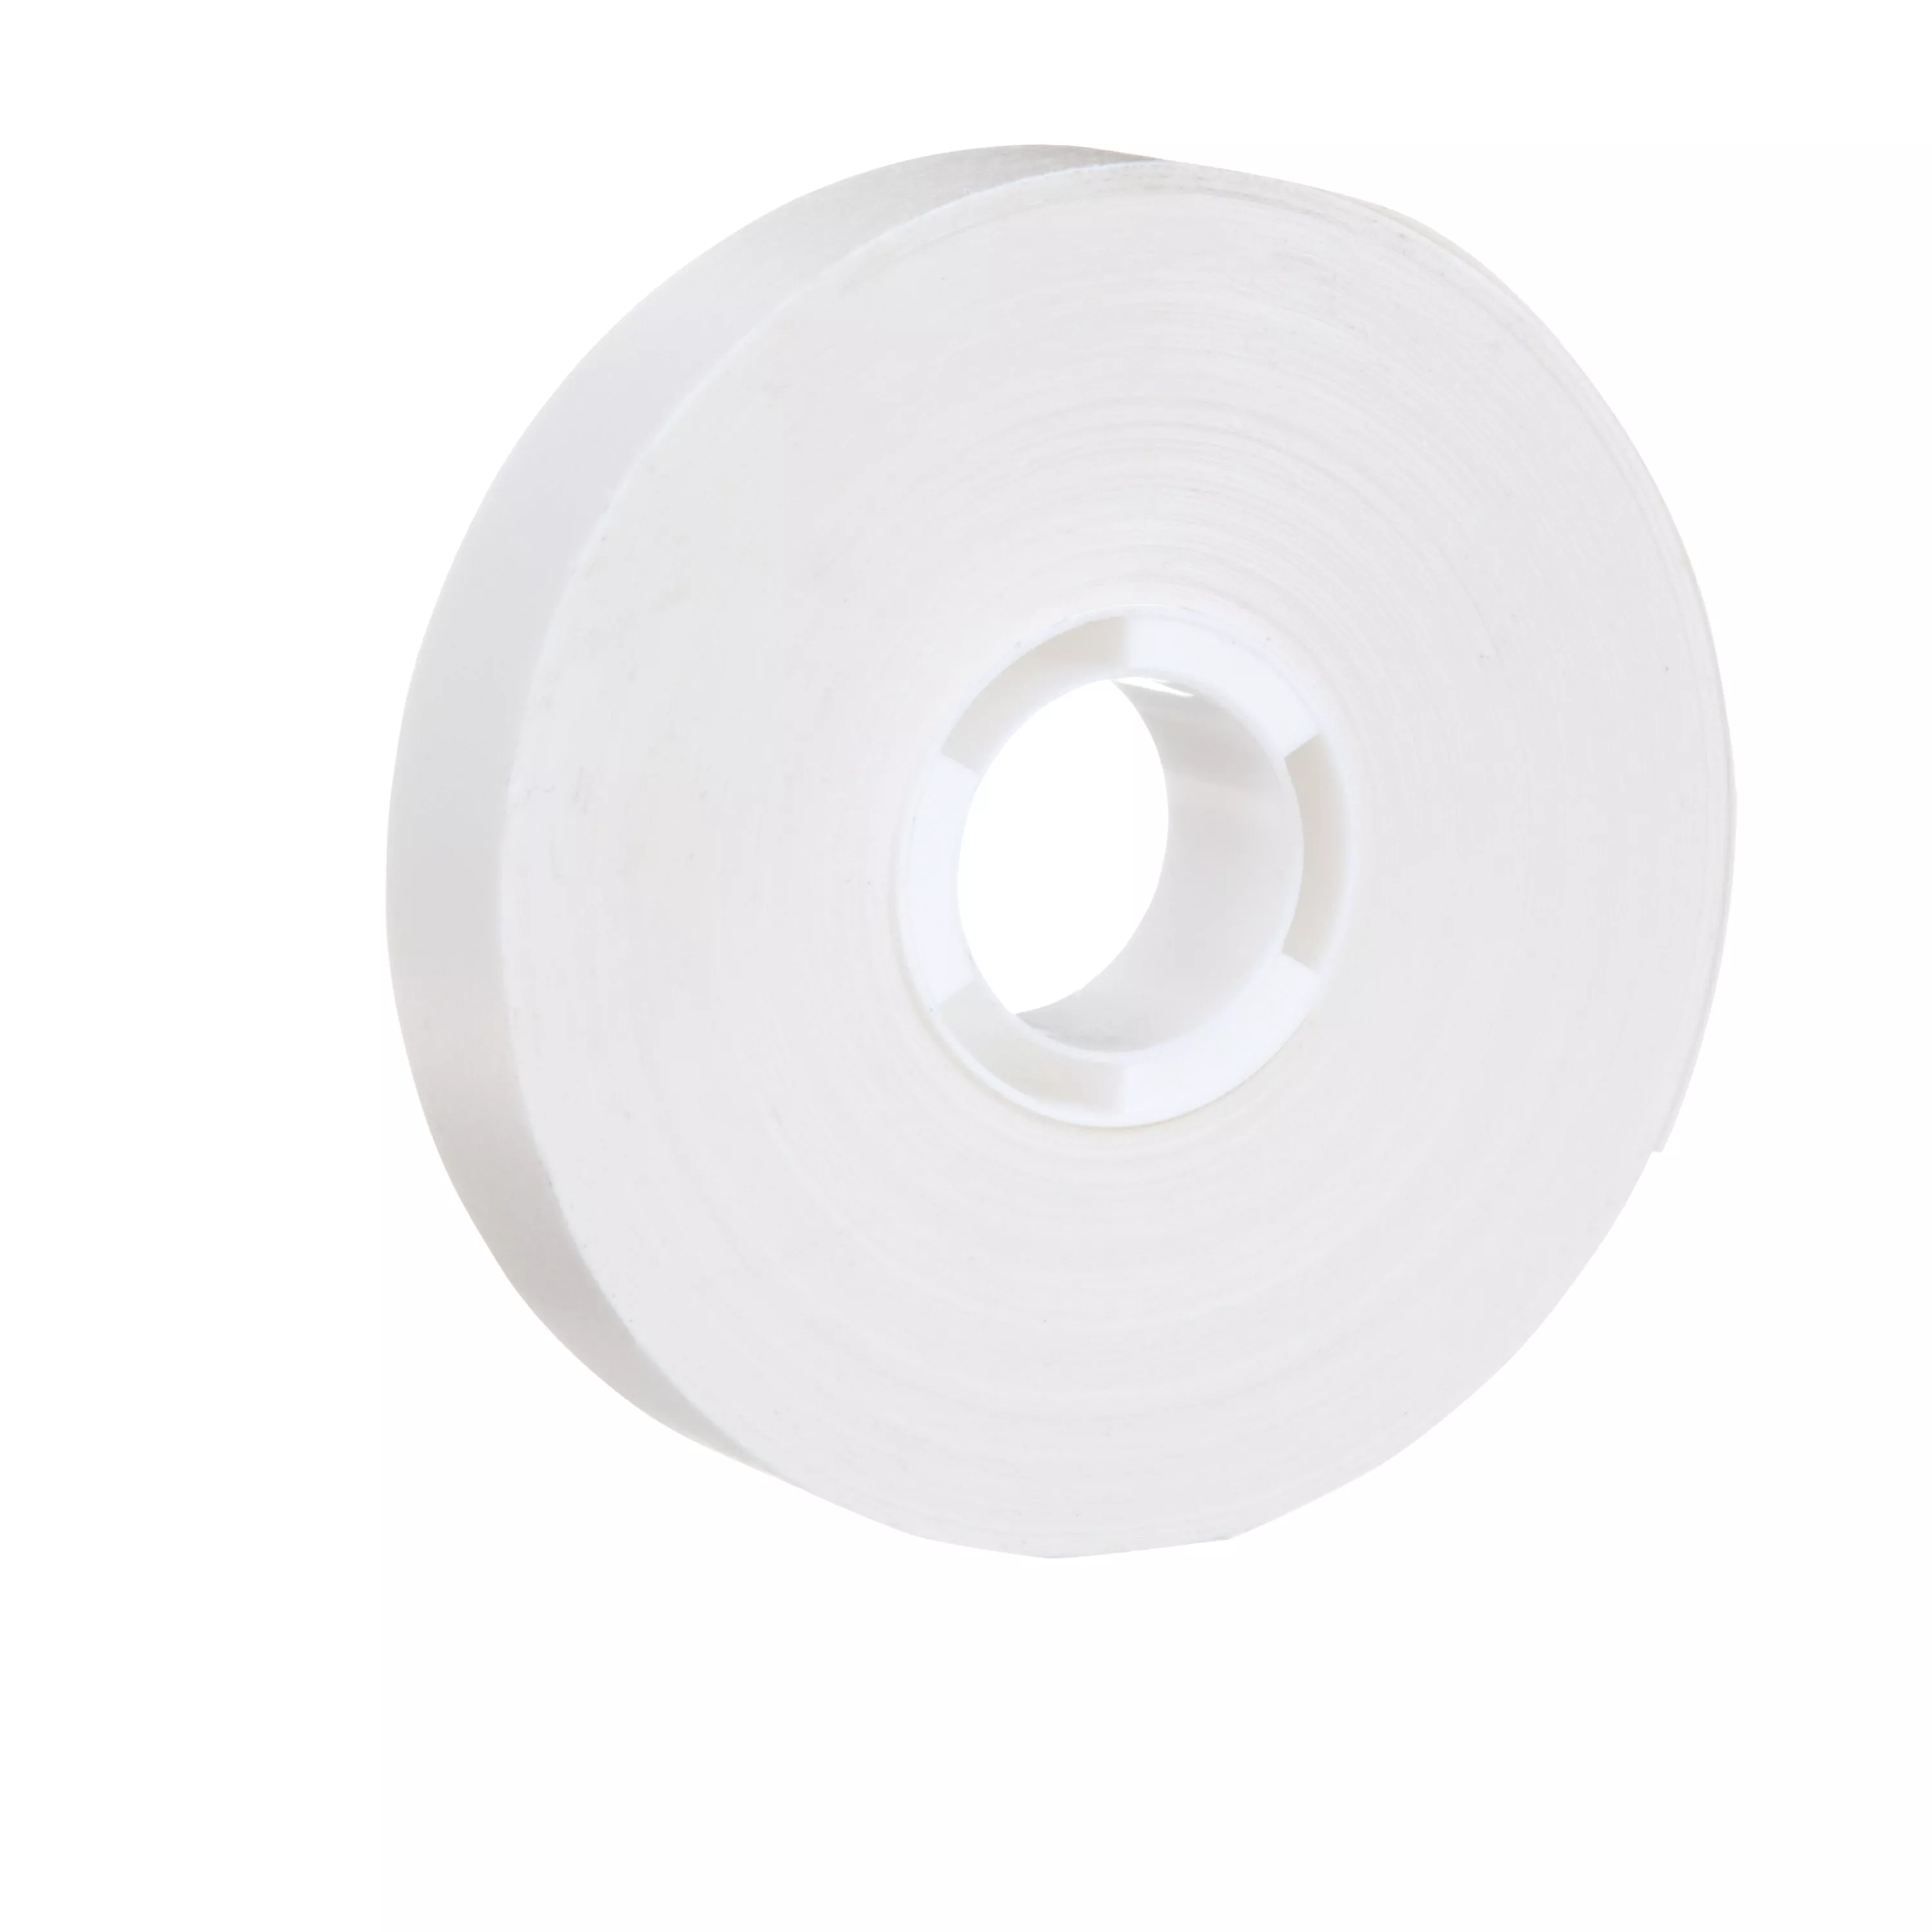 Scotch® ATG Repositionable Double Coated Tissue Tape 928, Translucent
White, 3/4 in x 36 yd, 2 mil, (12 Roll/Carton) 48 Roll/Case